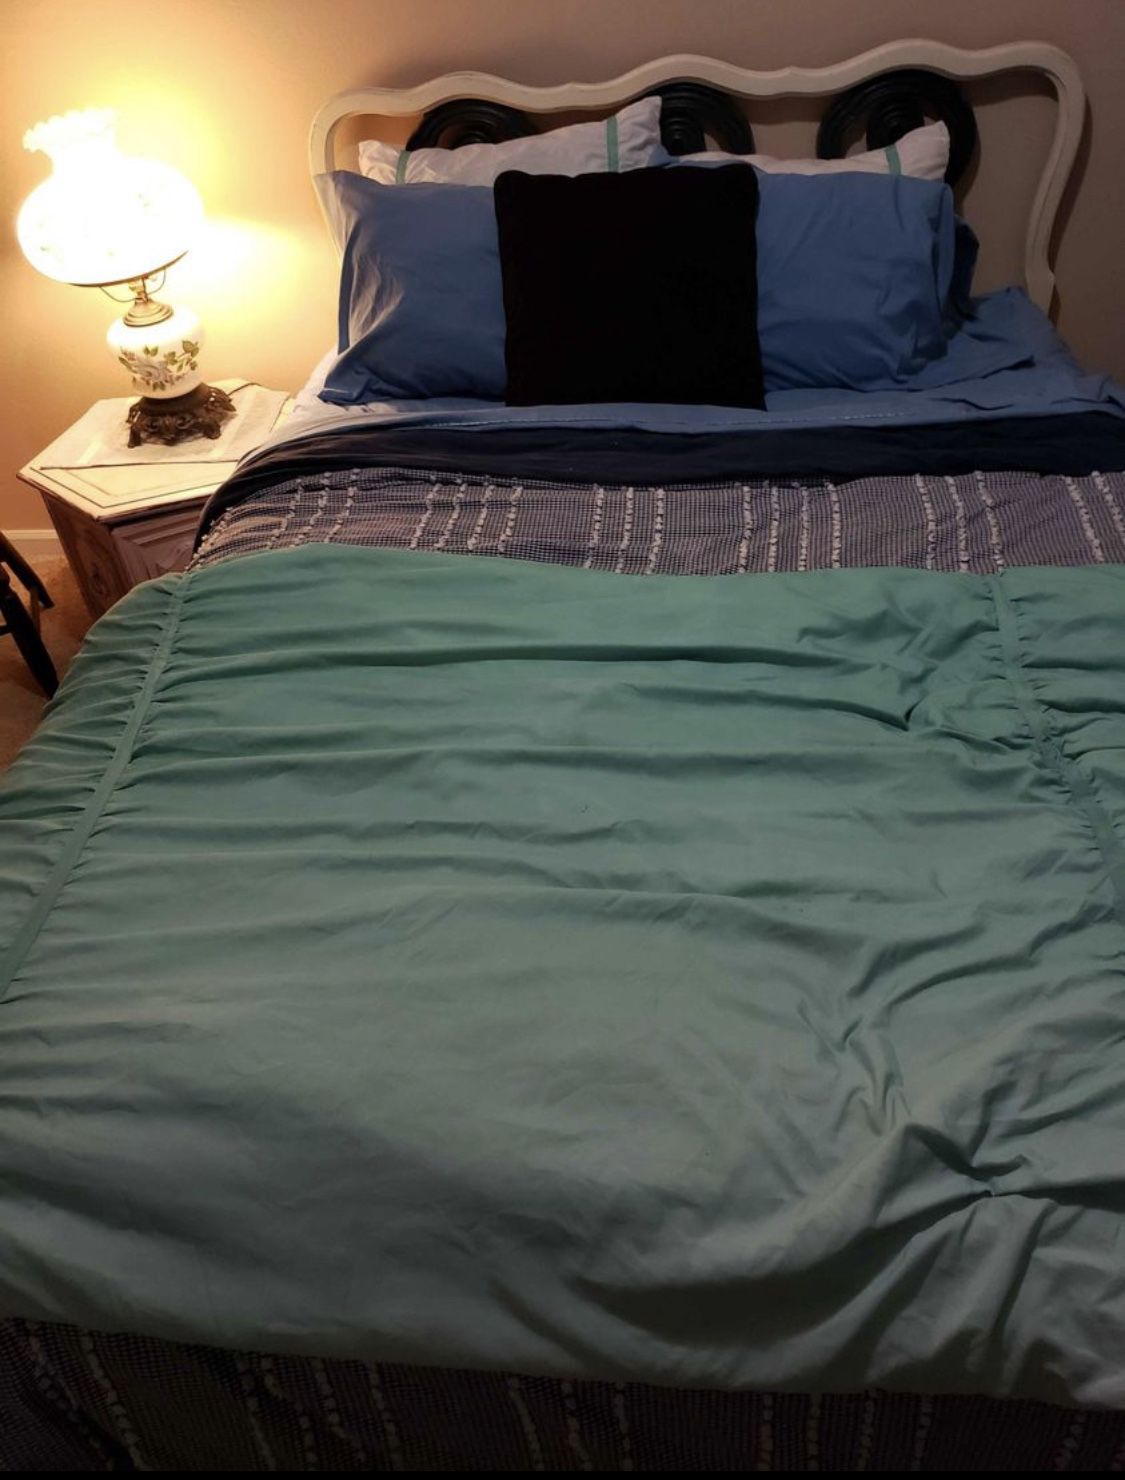 Mattress, Bed Frame And Bedding